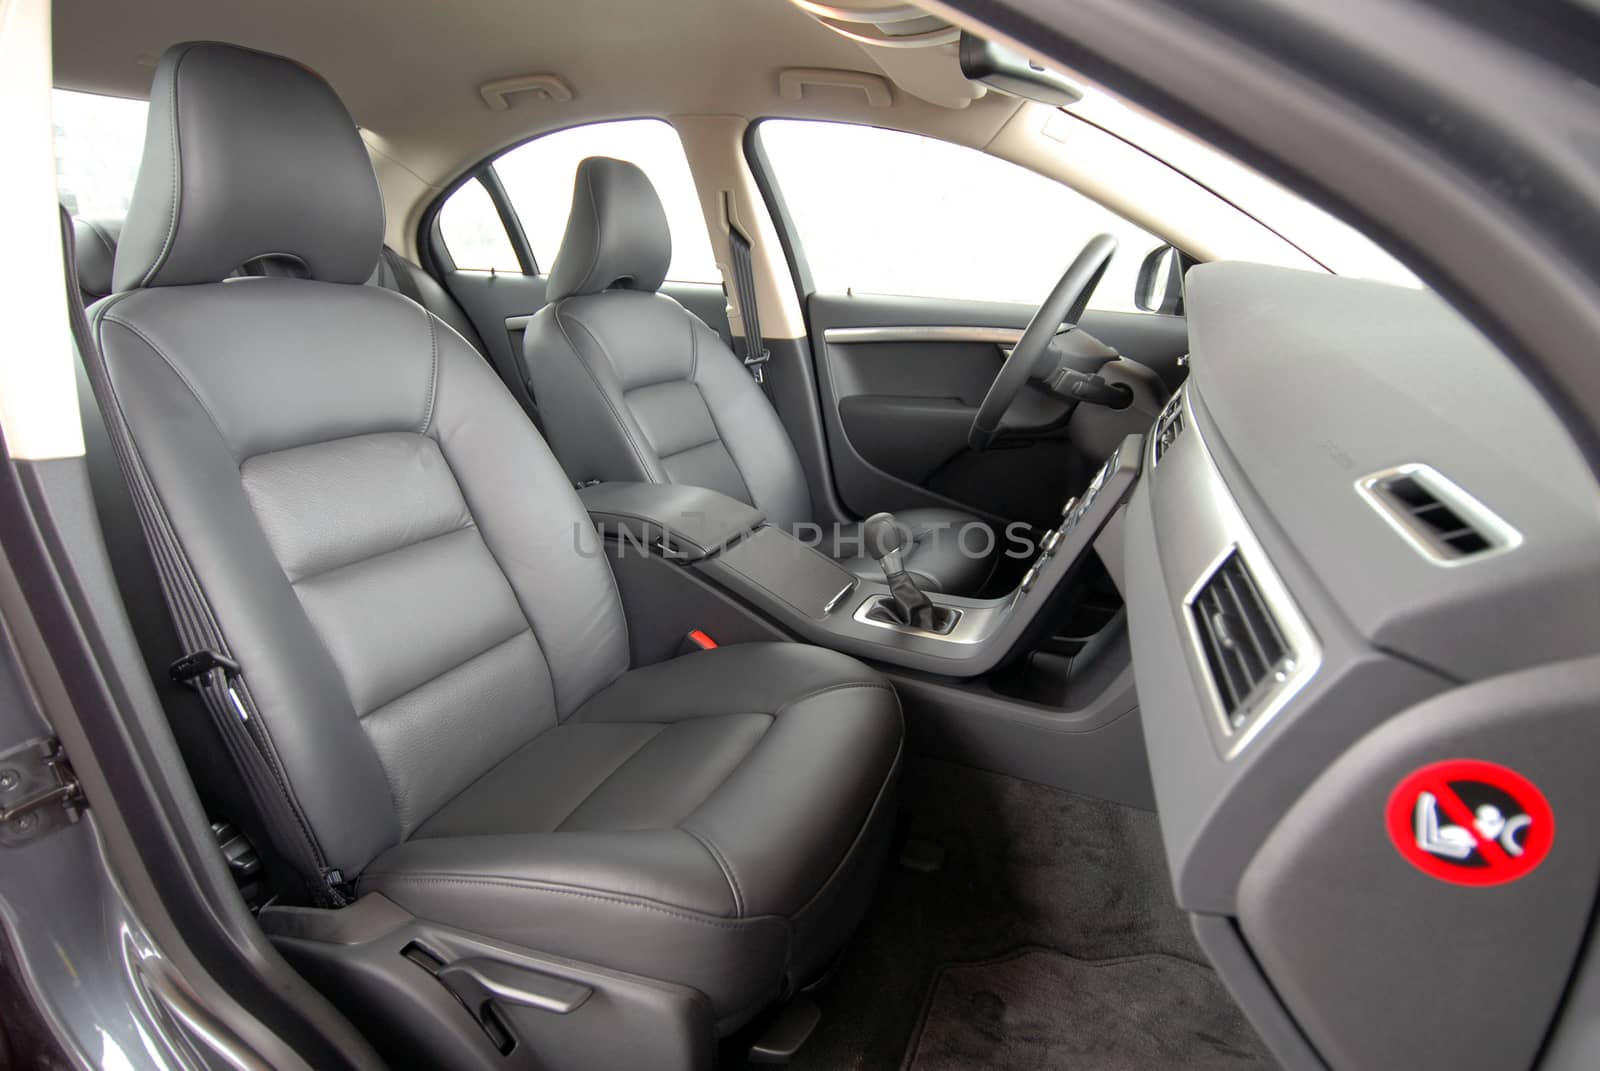 Front Leather seats of a luxury car